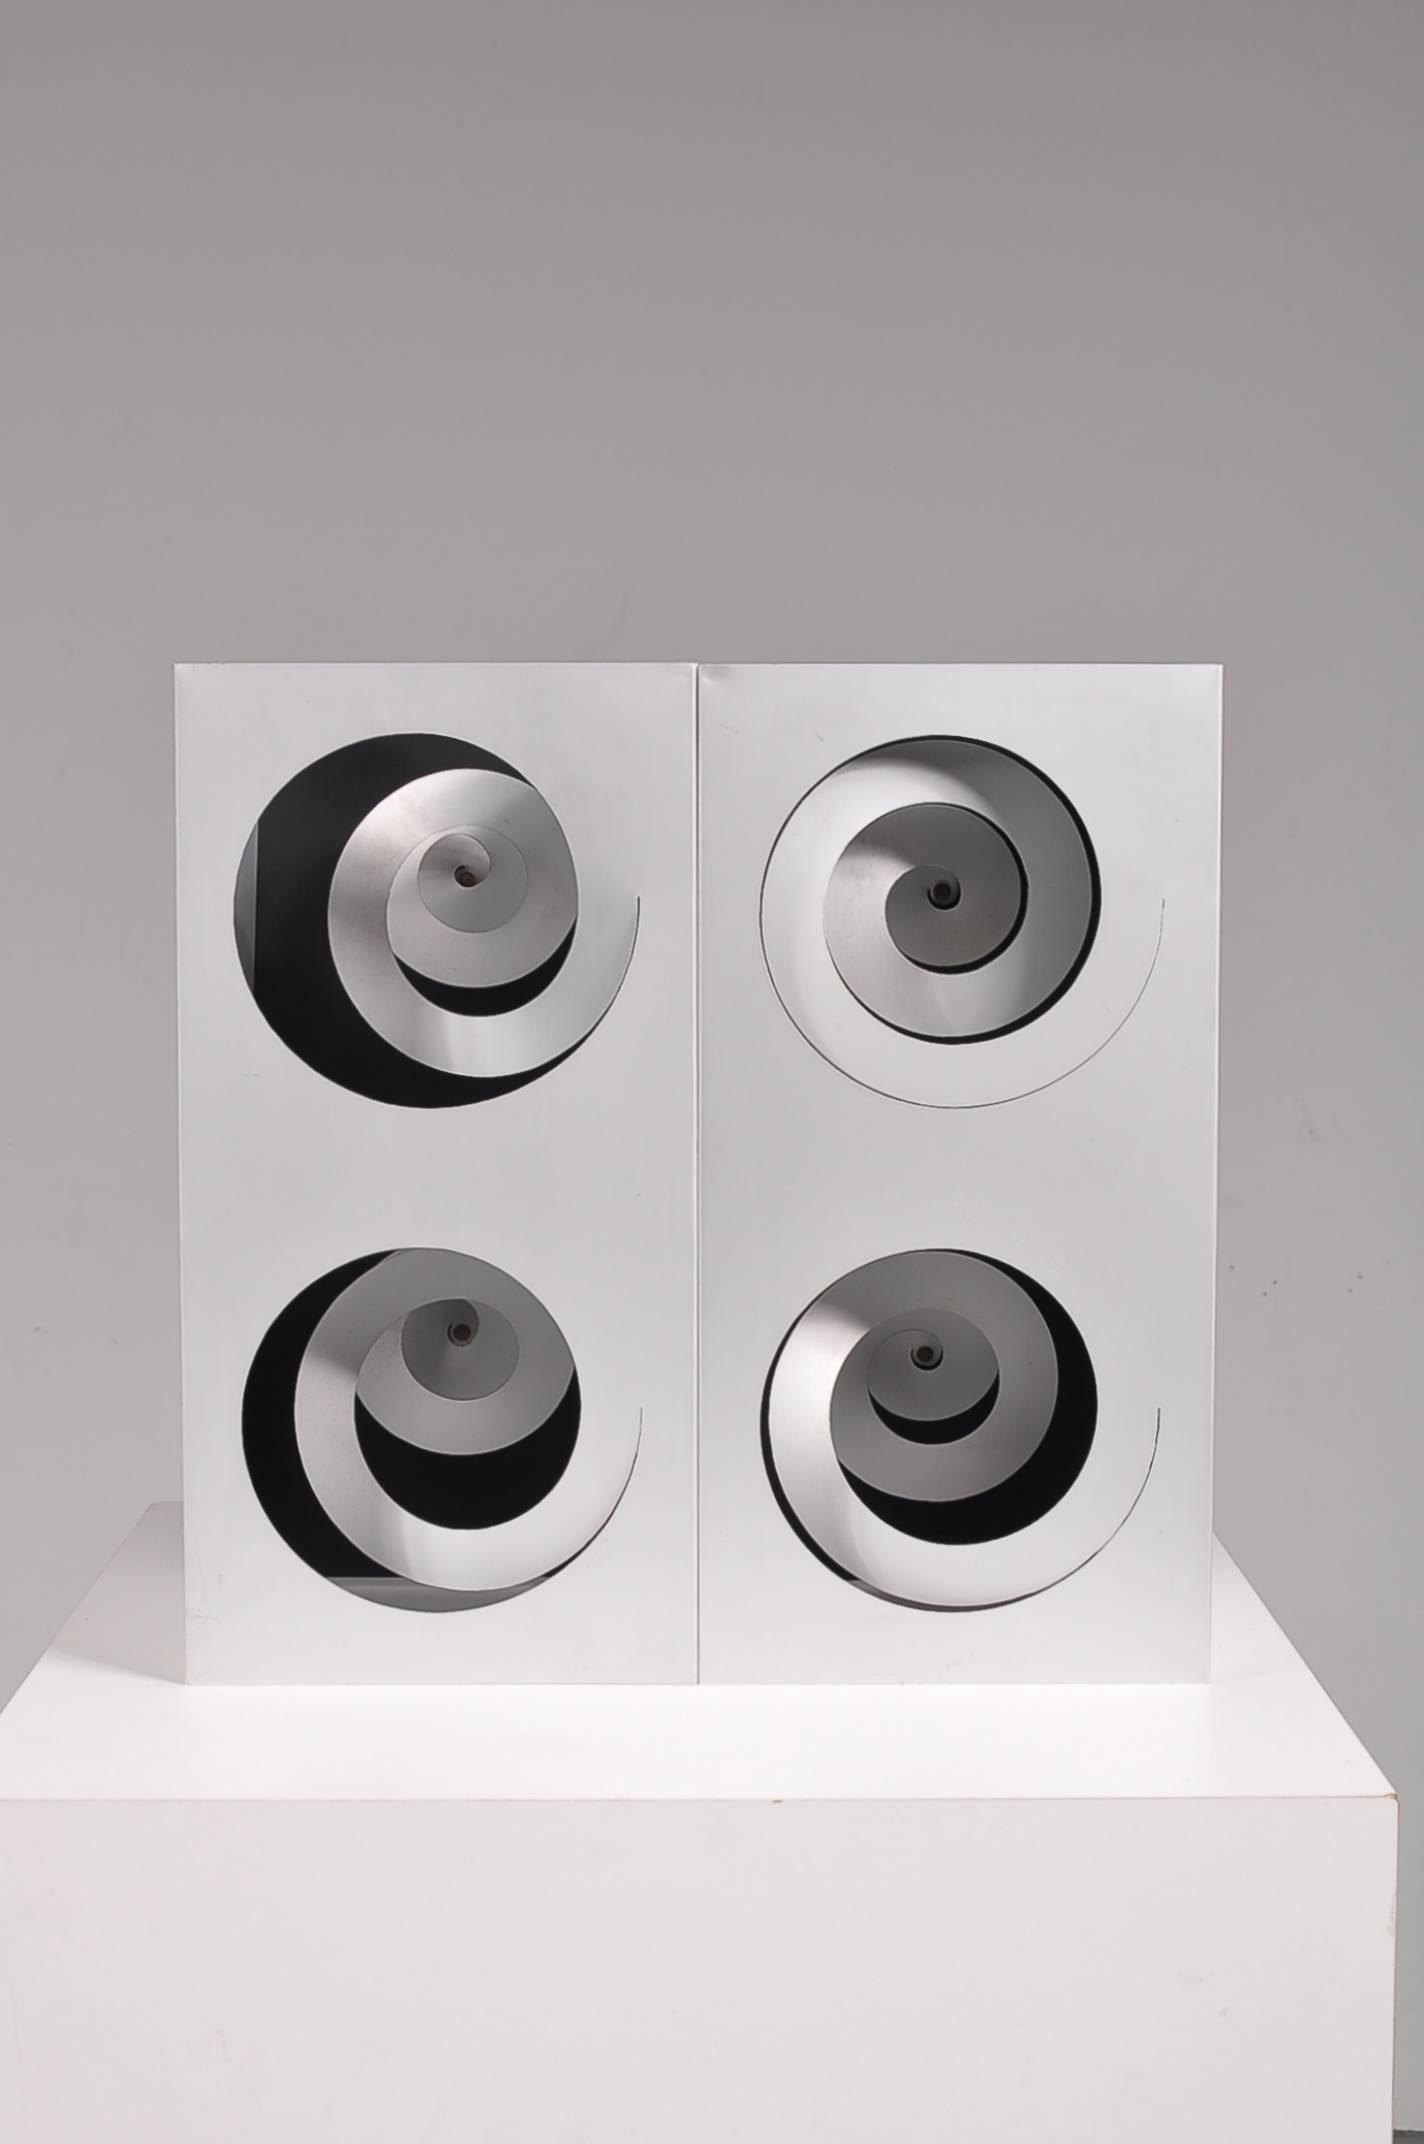 An extremely rare metal sculpture designed by Enzo Mari, manufactured by Danese in Italy between 1958 and 1968.

Only 50 of these pieces have been produced, this is number 10, labeled and numbered in the back.

It is made of high quality grey